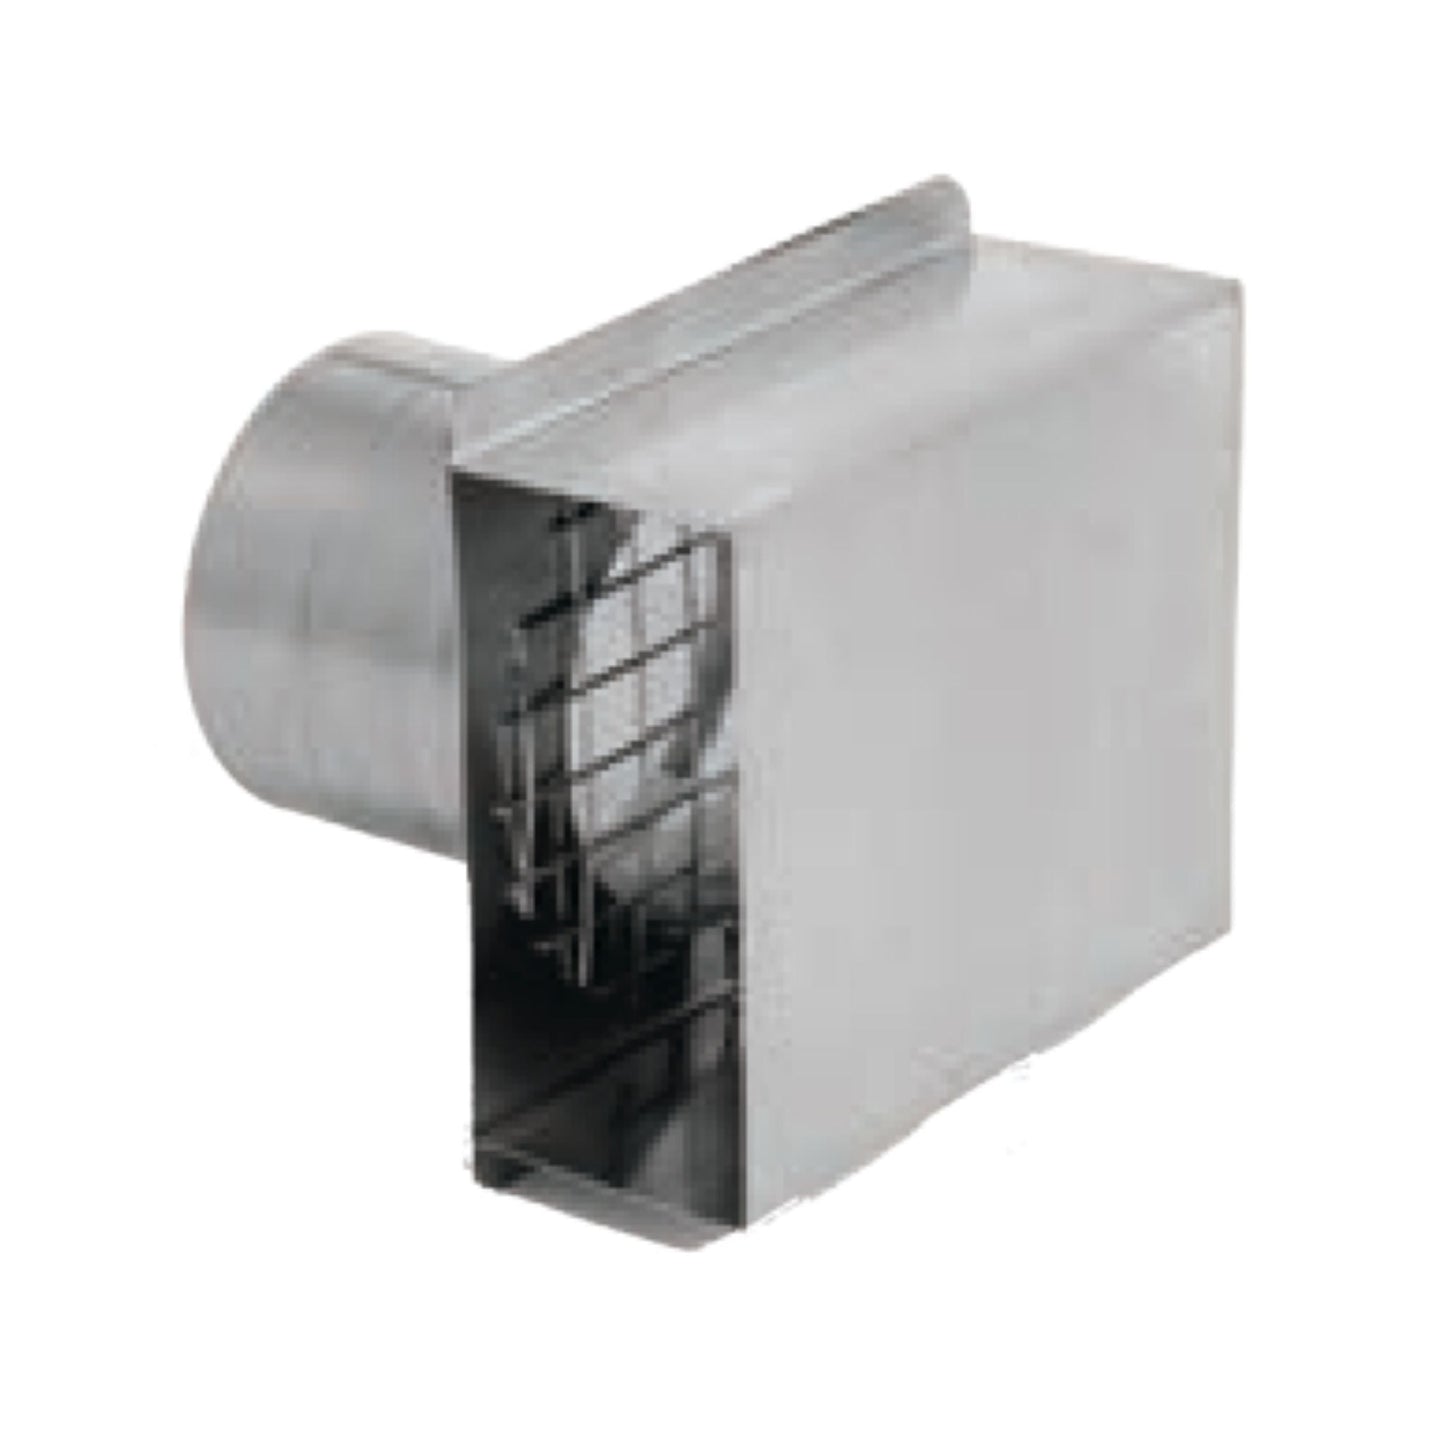 DuraVent FasNSeal 3" 29-4C Stainless Steel Termination Box